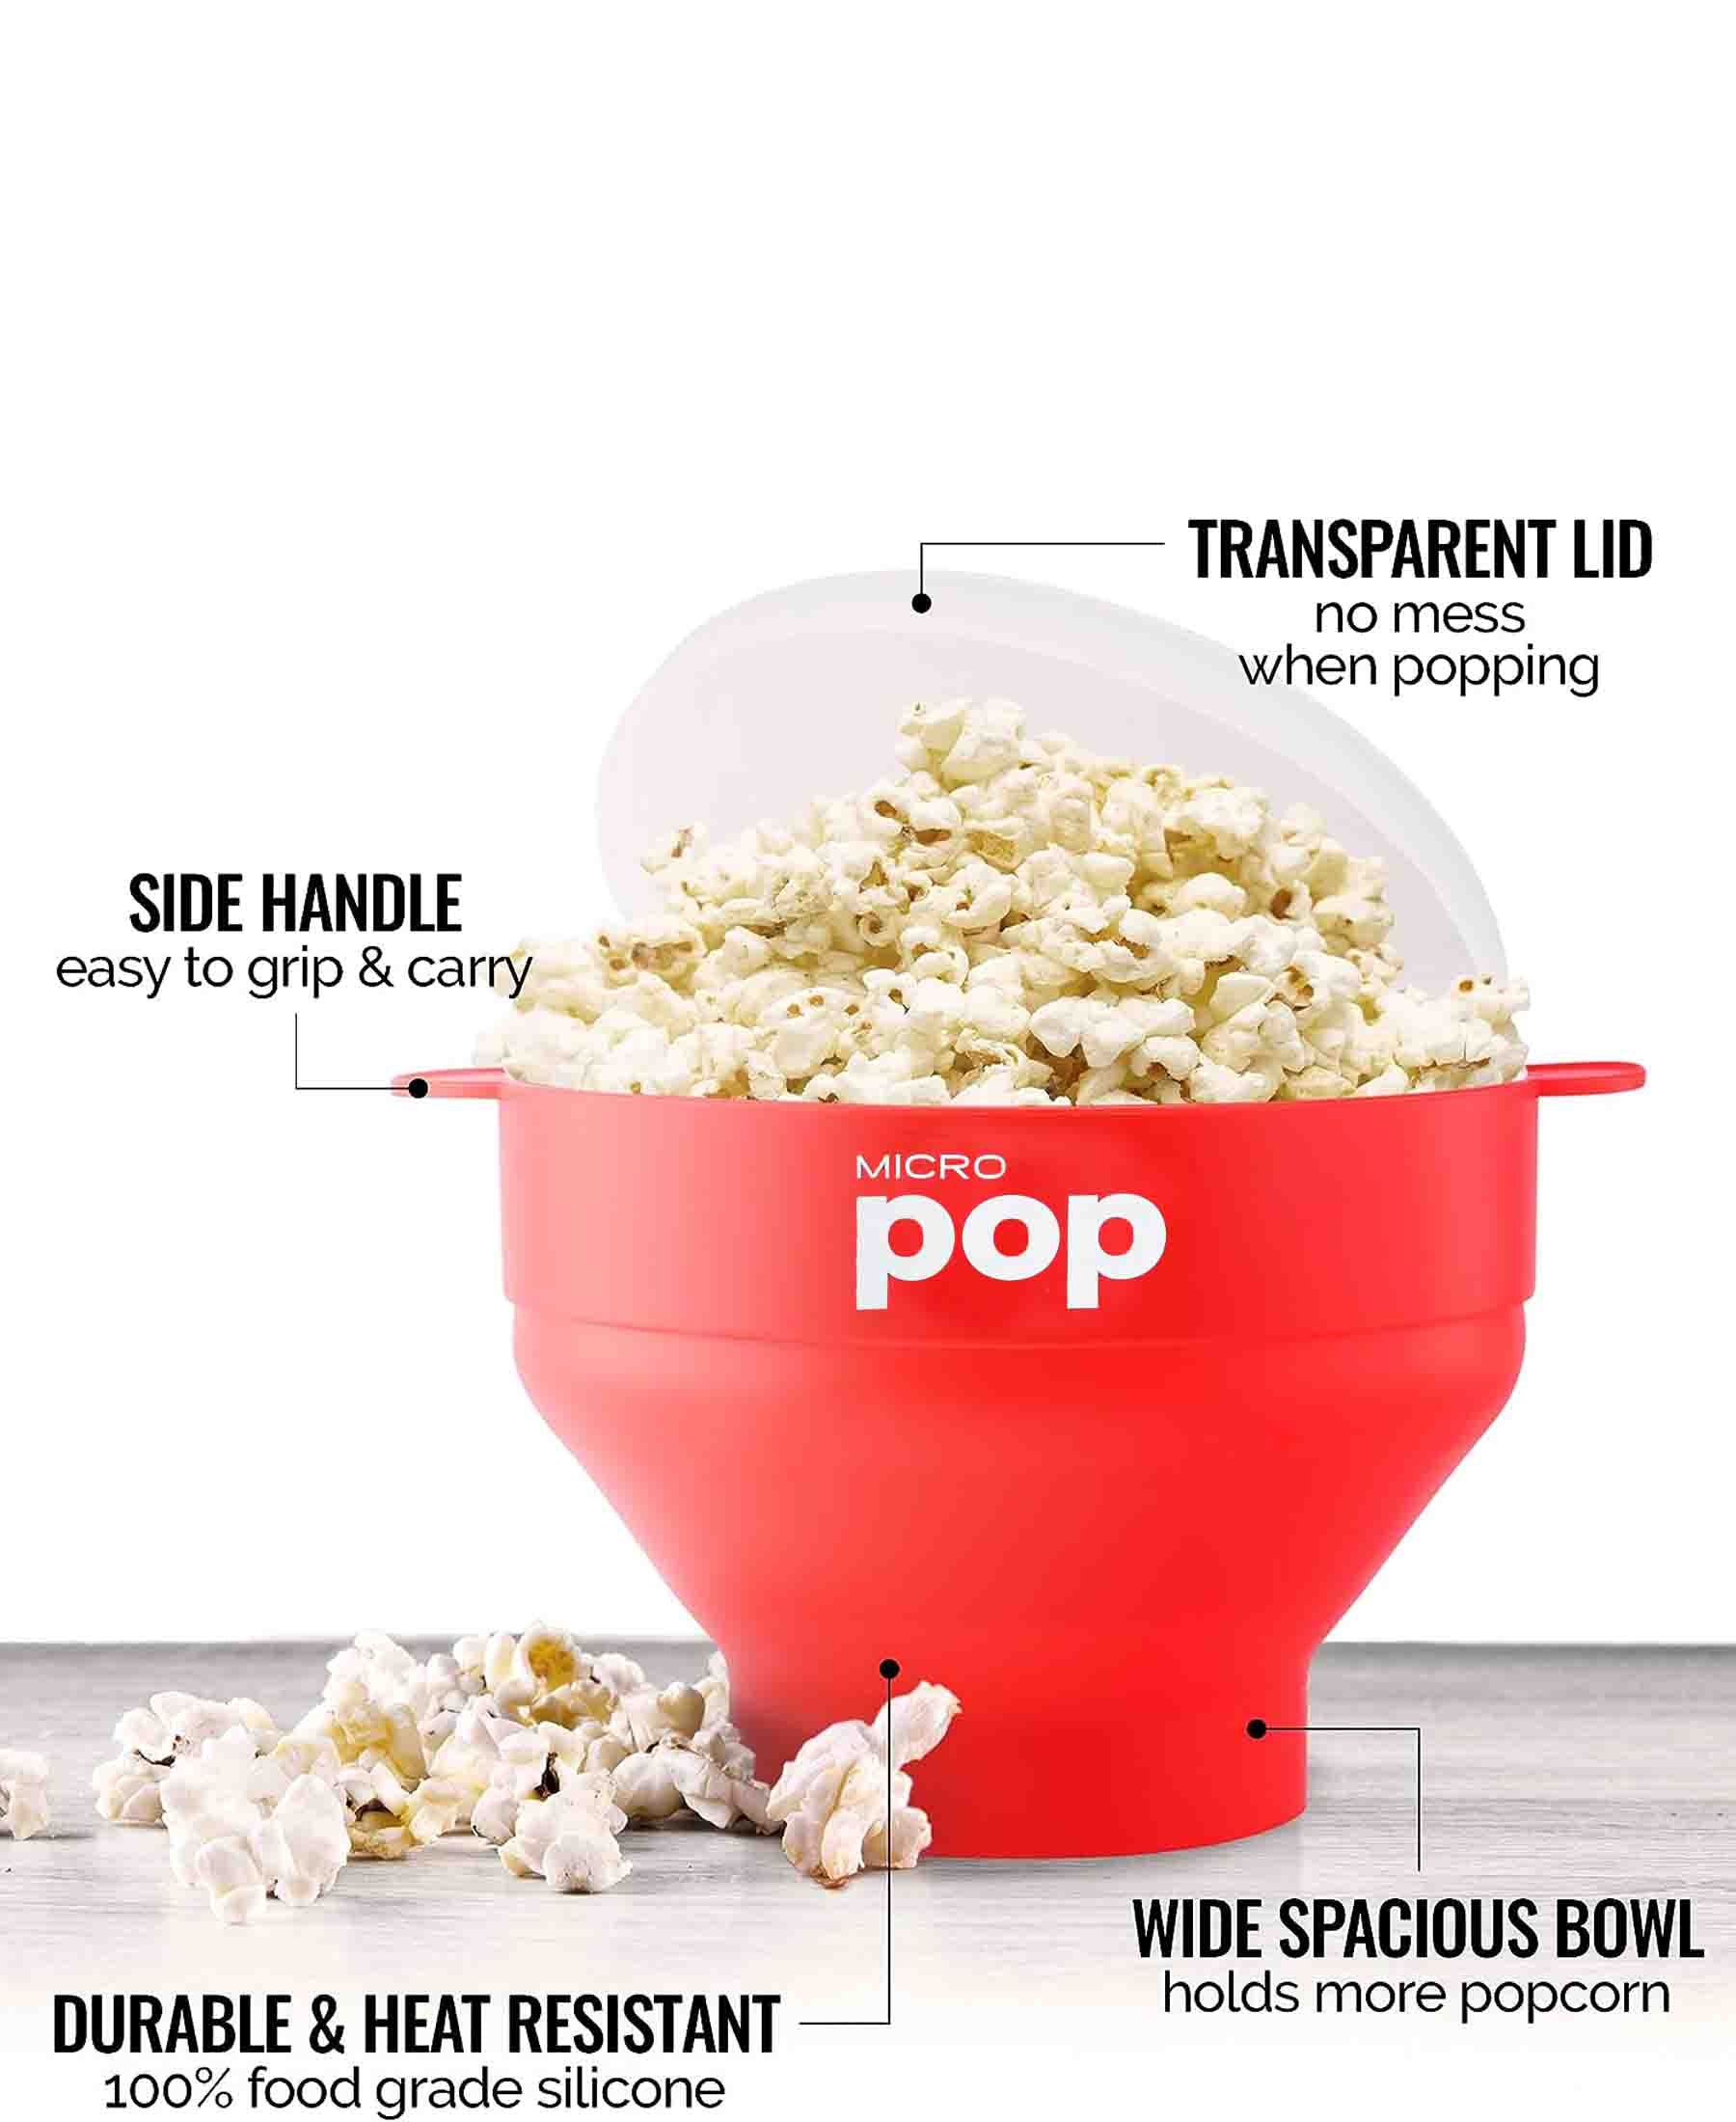 Kitchen Junkies Silicone Microwave Popcorn Popper - Red